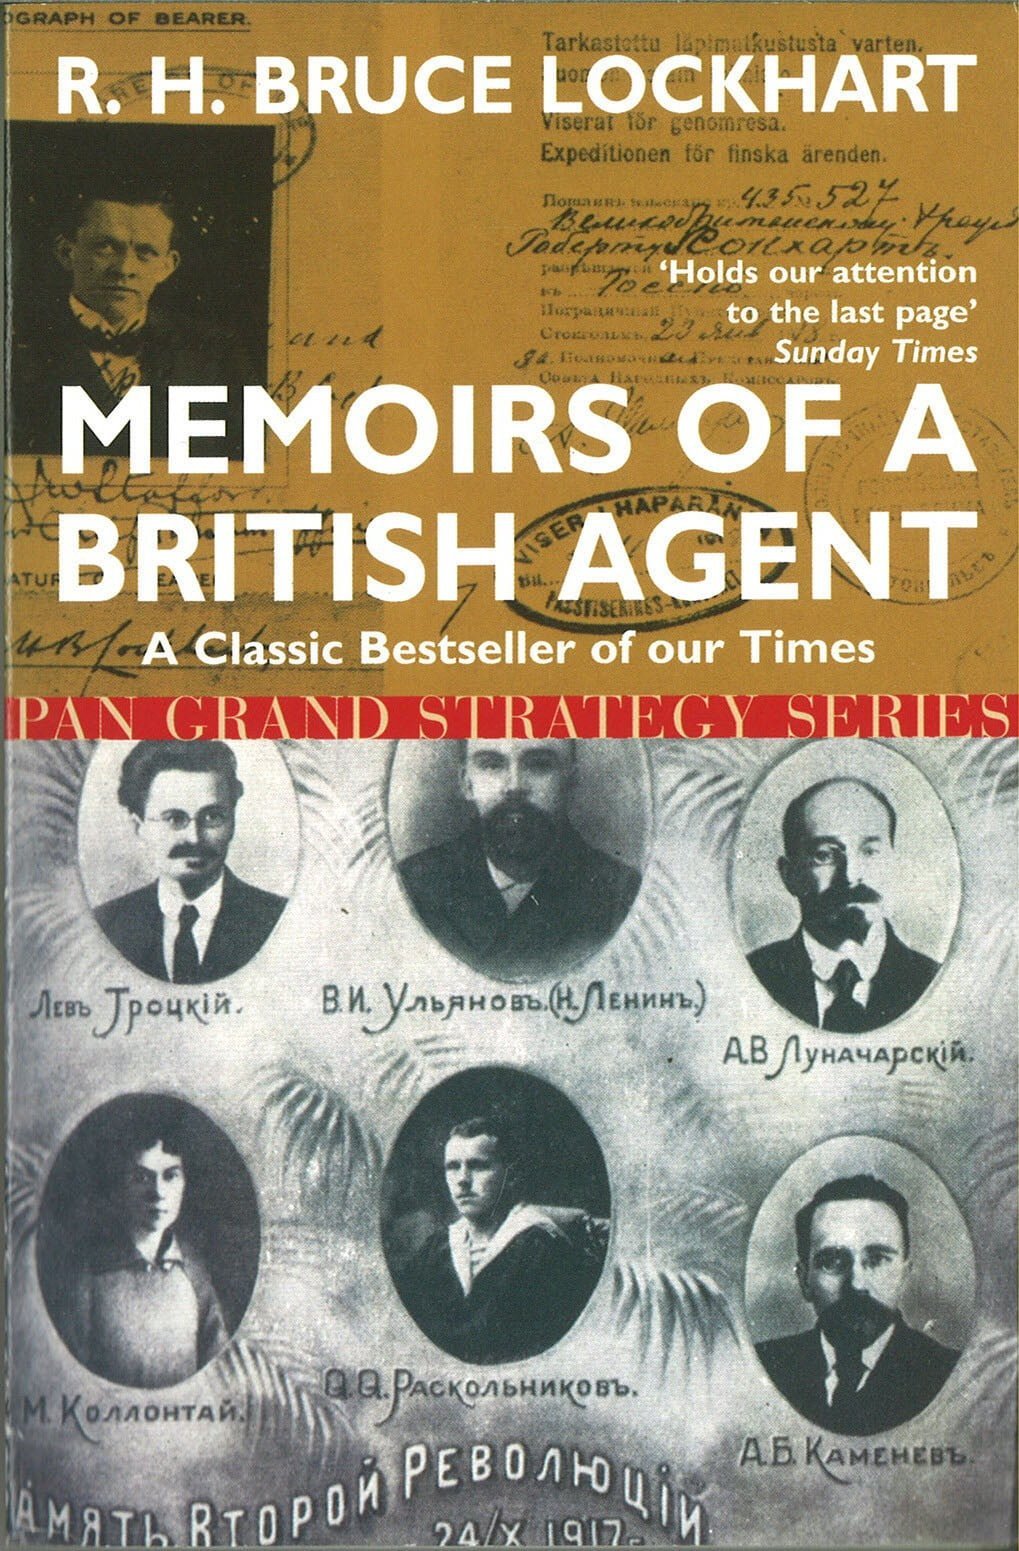 Review: Bruce Lockhart – “Memoirs of a British Agent”